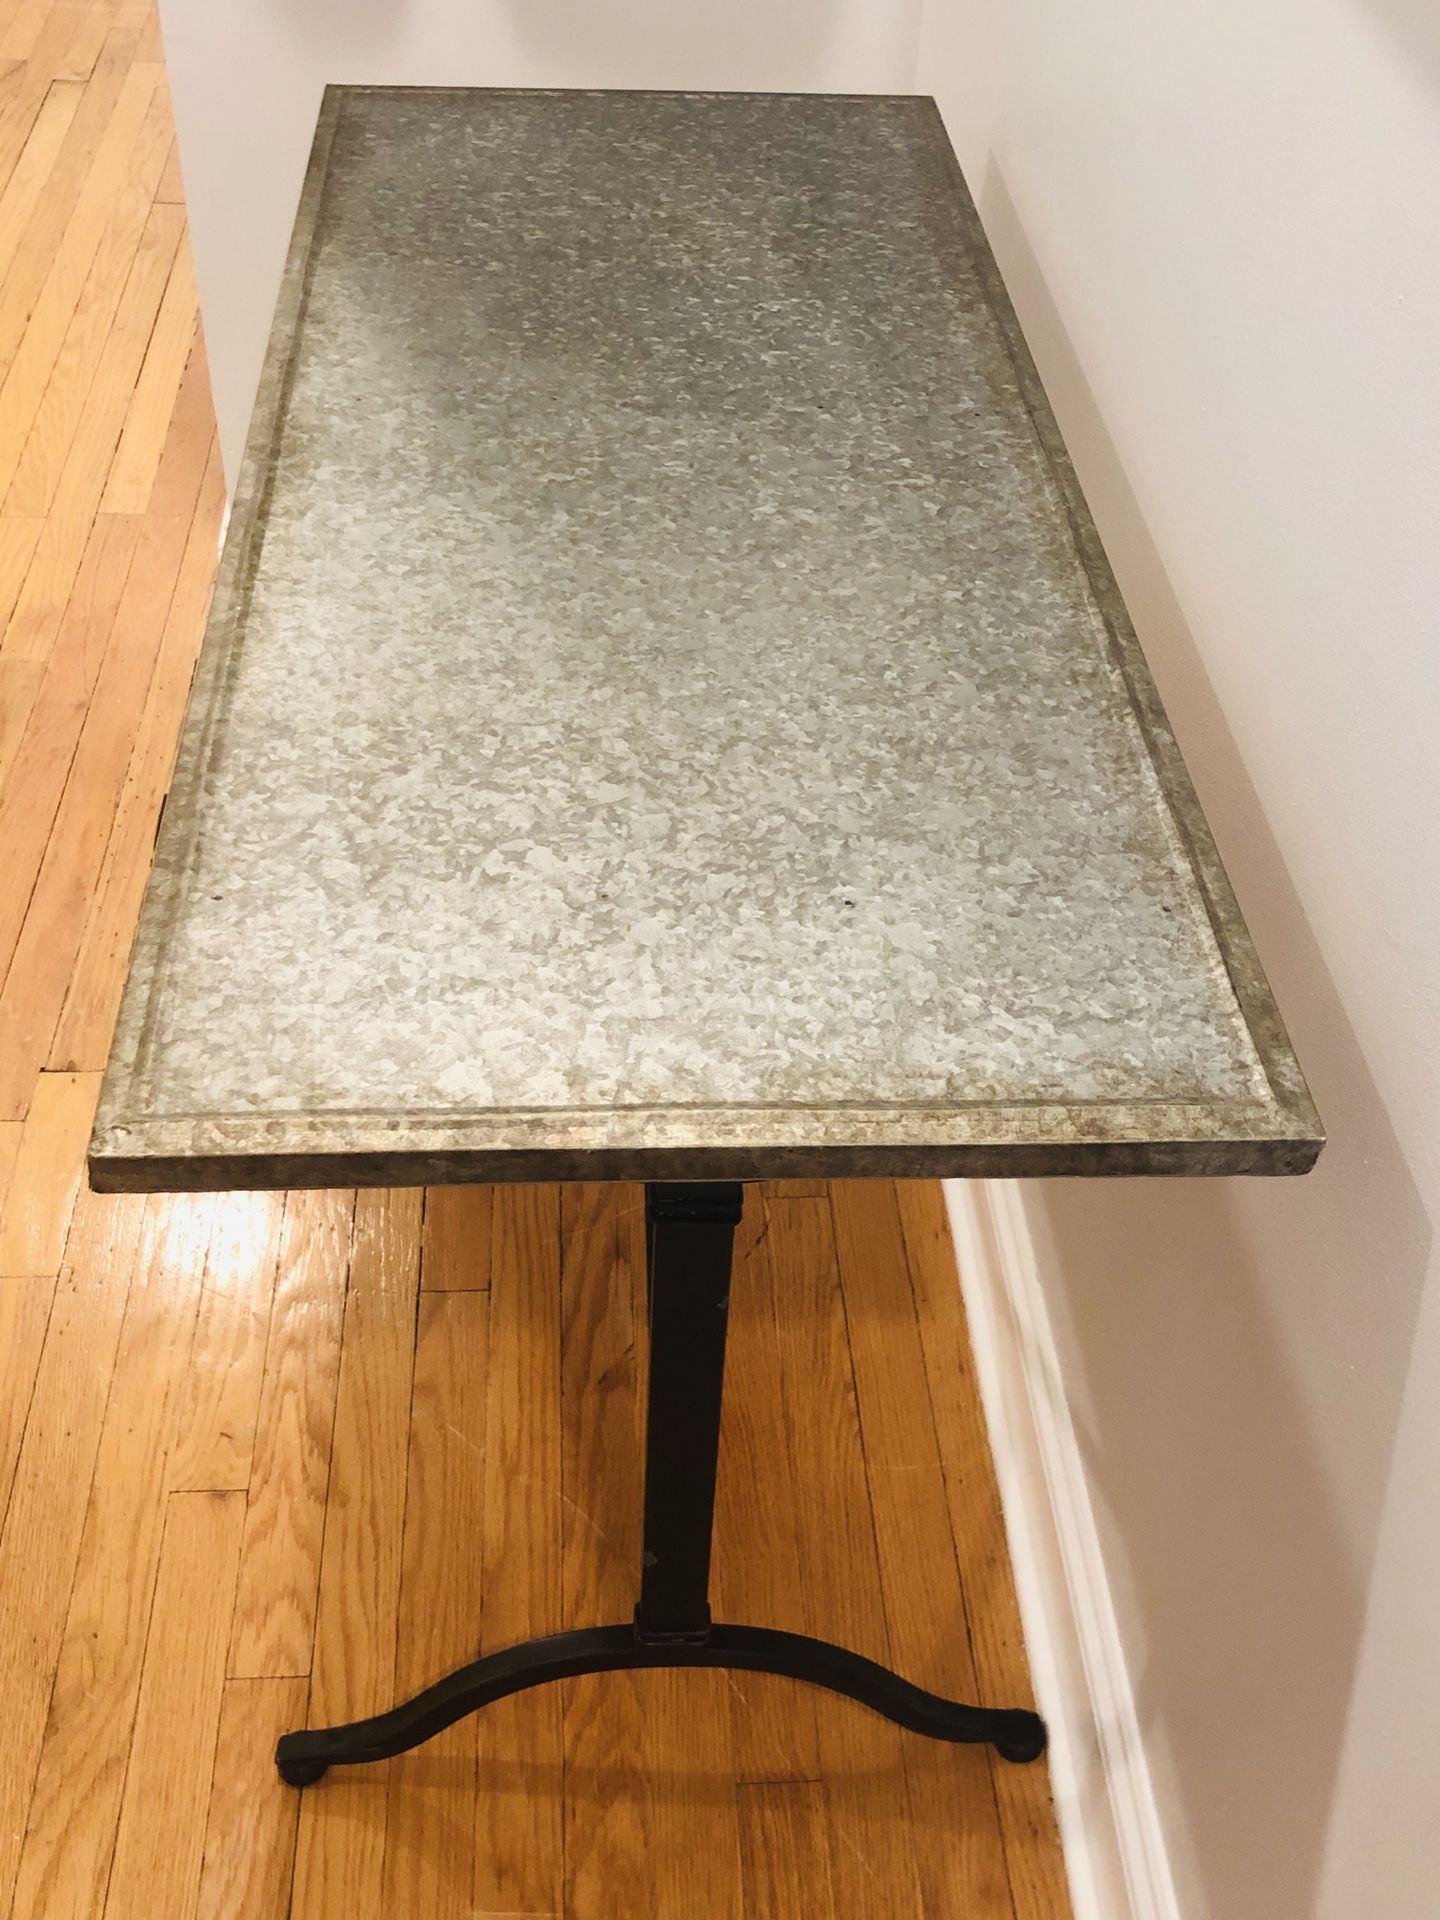 Lightweight table with metal finish